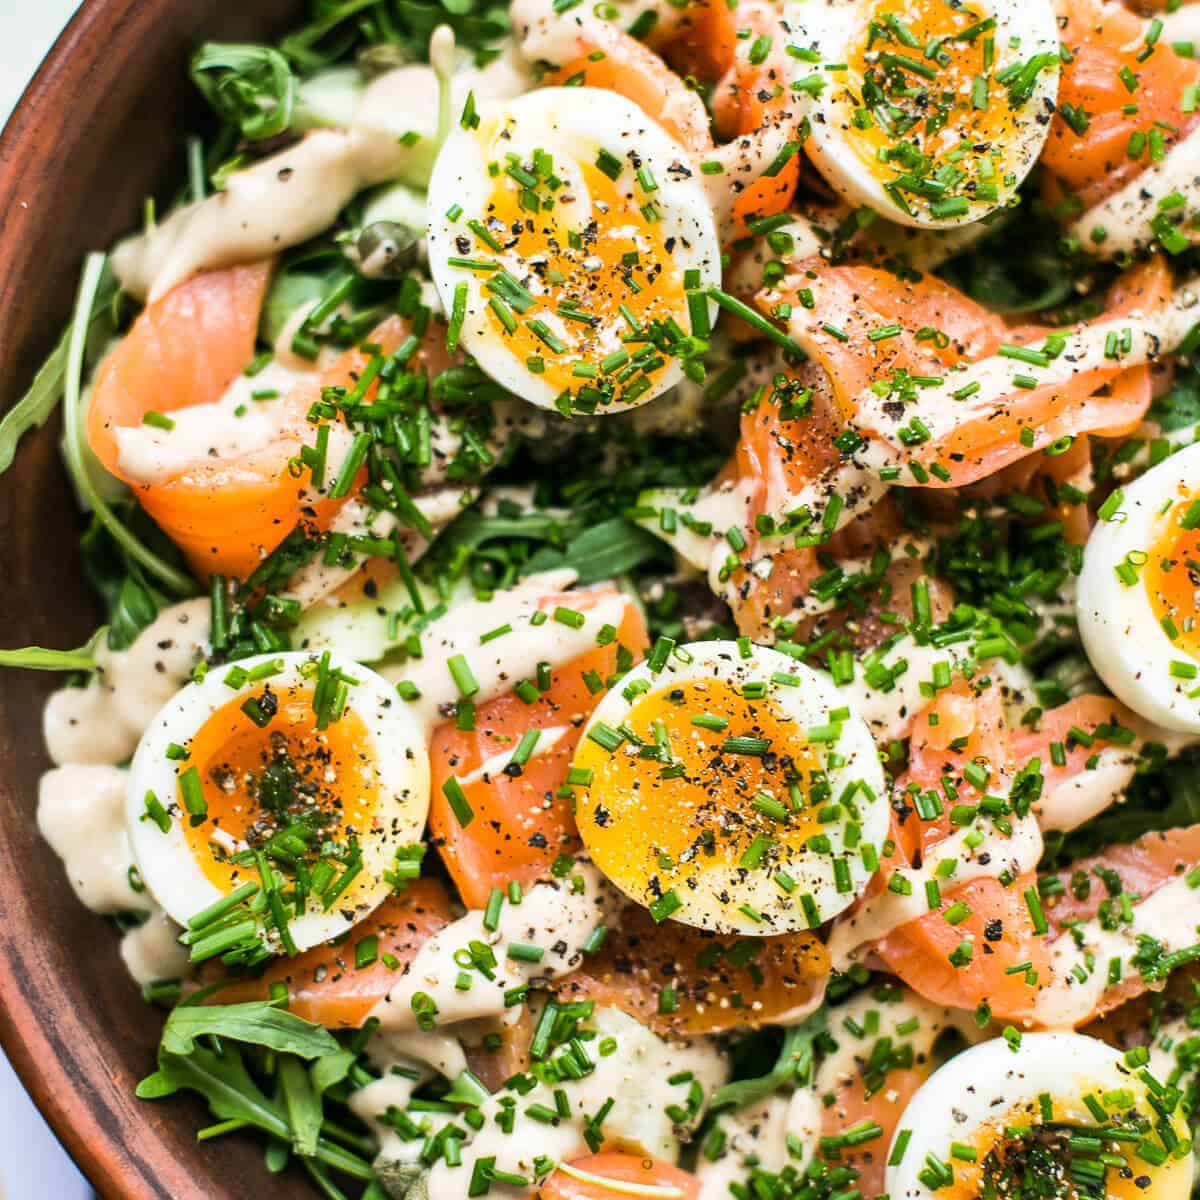 cured salmon salad in a brown bowl.